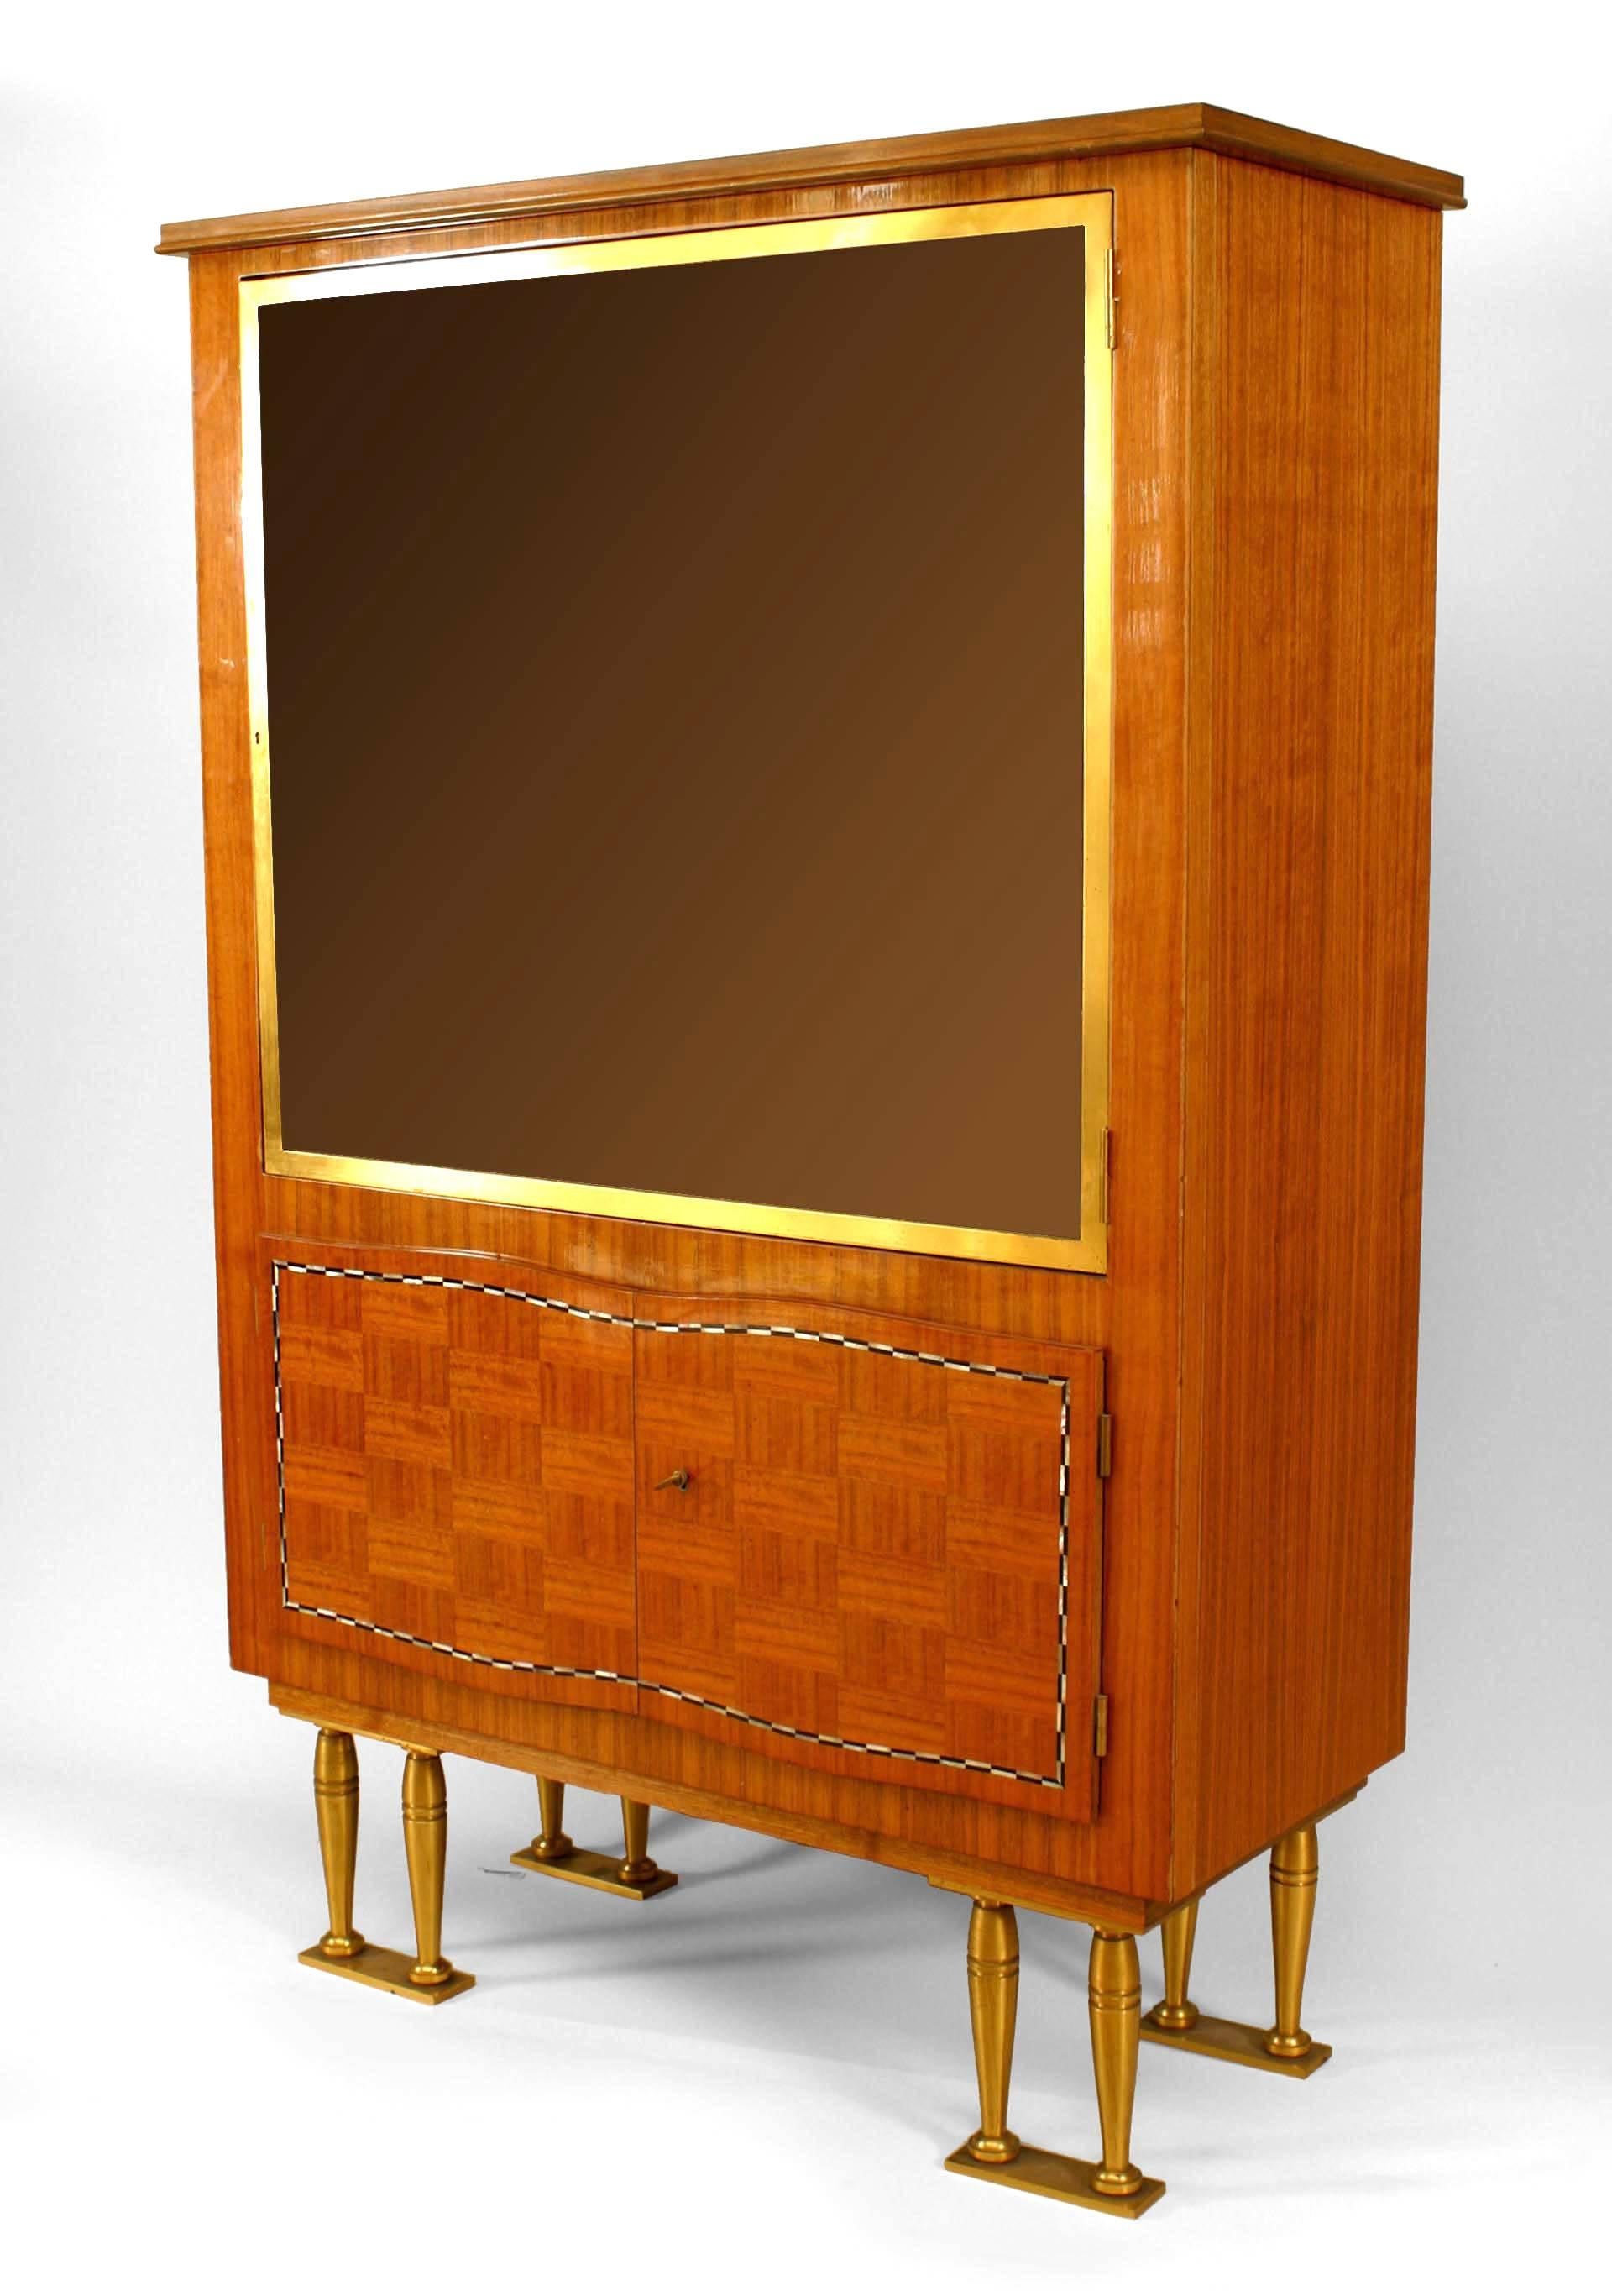 French Post-War Design (1950s) rosewood display cabinet with a Pair of marquetry inlaid doors trimmed with pearl & ebony over a large glass door on Paired bronze legs. (Jules Leleu).
 